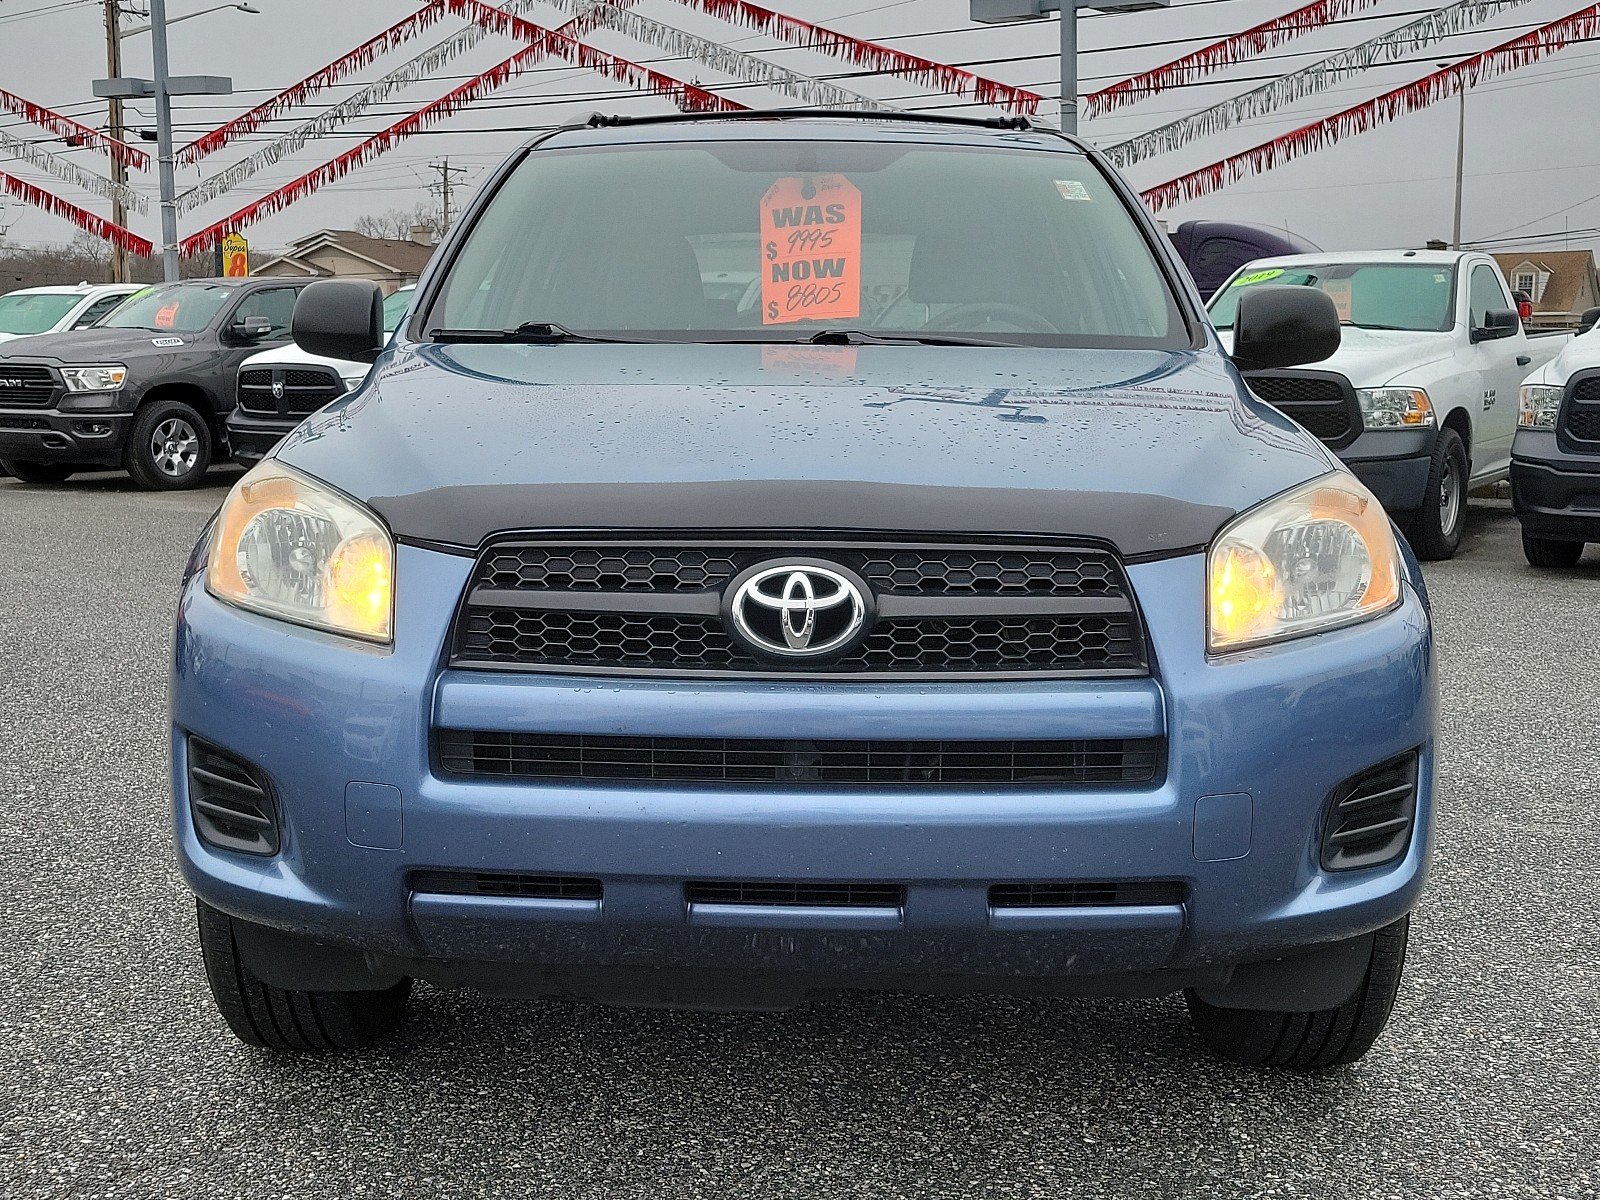 Used 2011 Toyota RAV4  with VIN 2T3BF4DV2BW128775 for sale in New Castle, DE